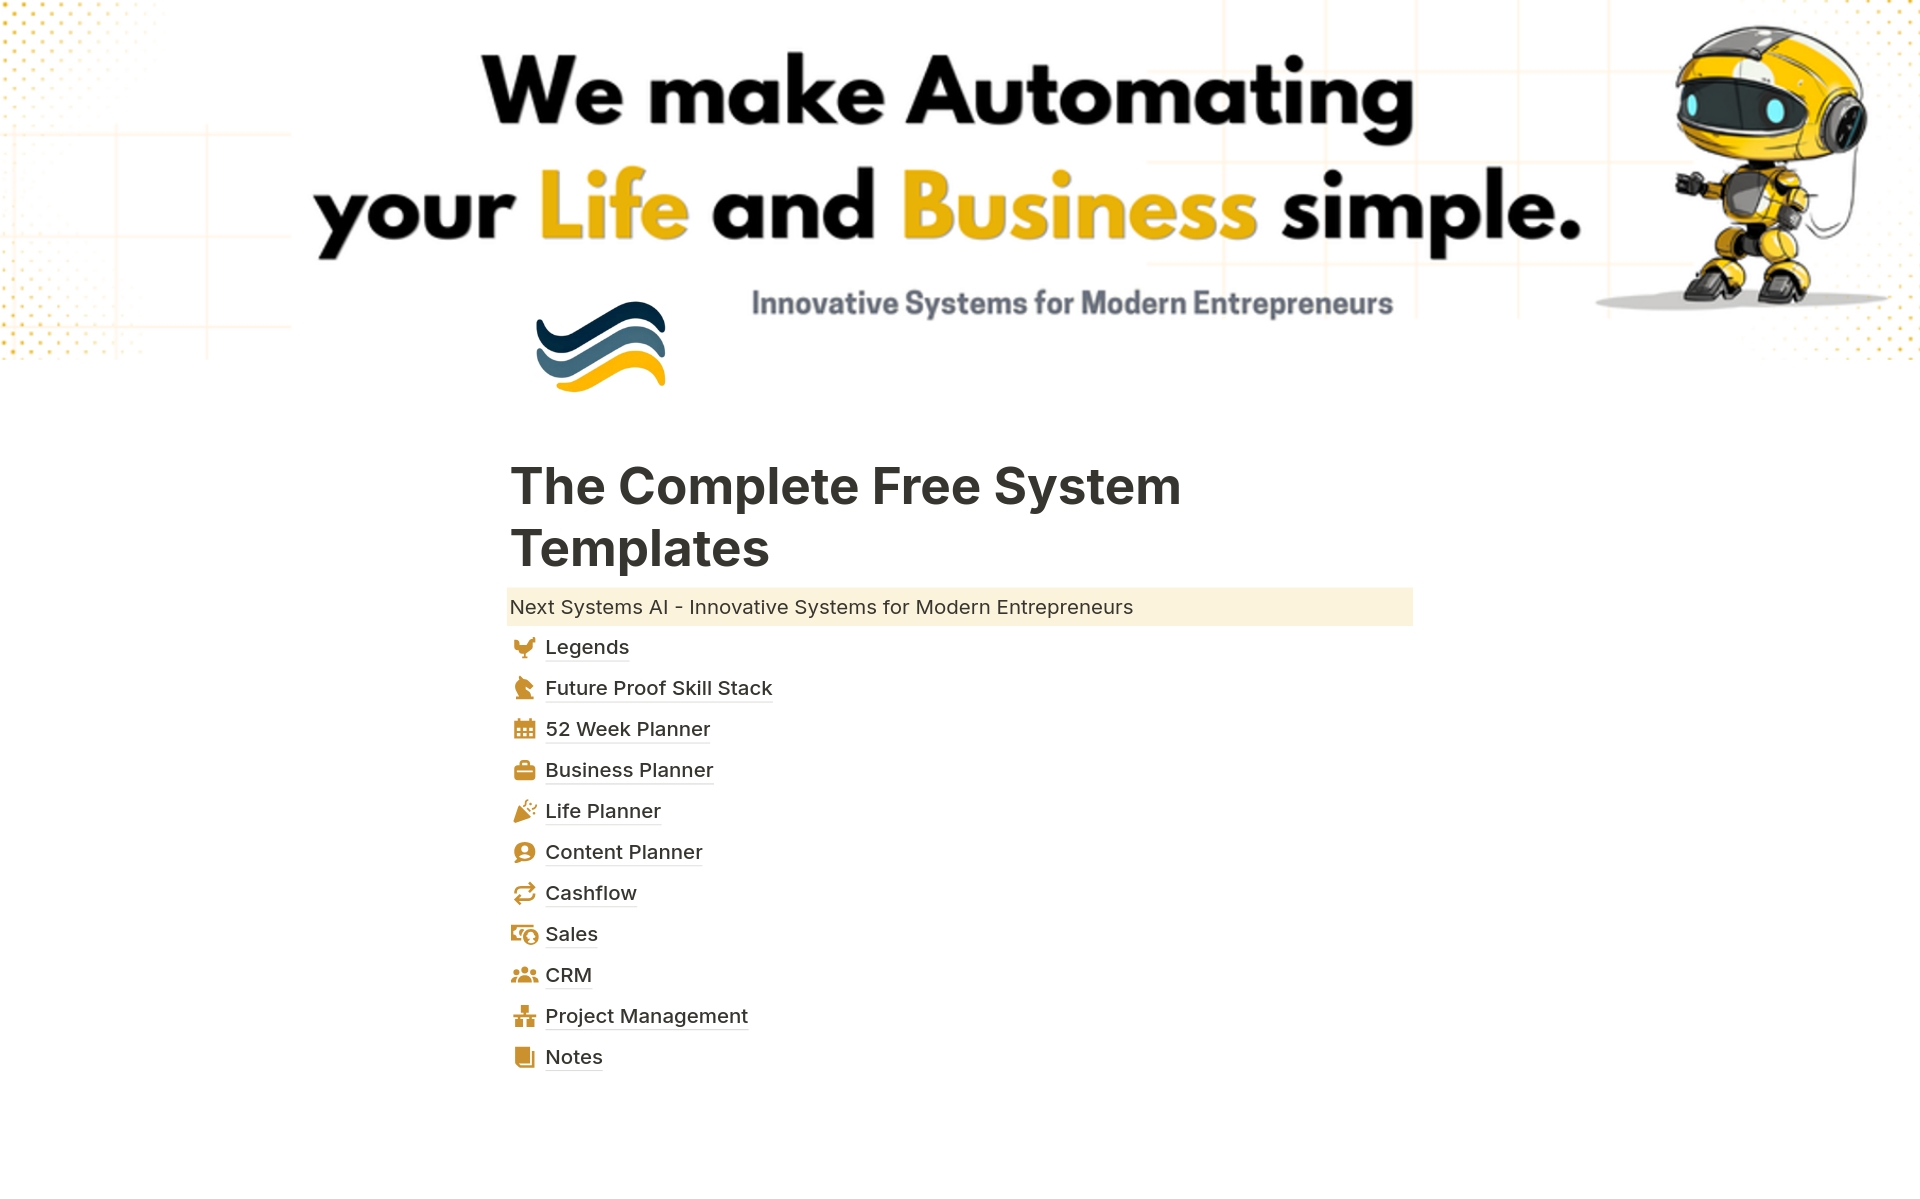 The Free Notion Template Bundle provides a diverse collection of standalone templates for managing various aspects of your business. From CRM and sales to planning and financial tracking, these templates are designed to streamline your workflow. Download these free templates to g